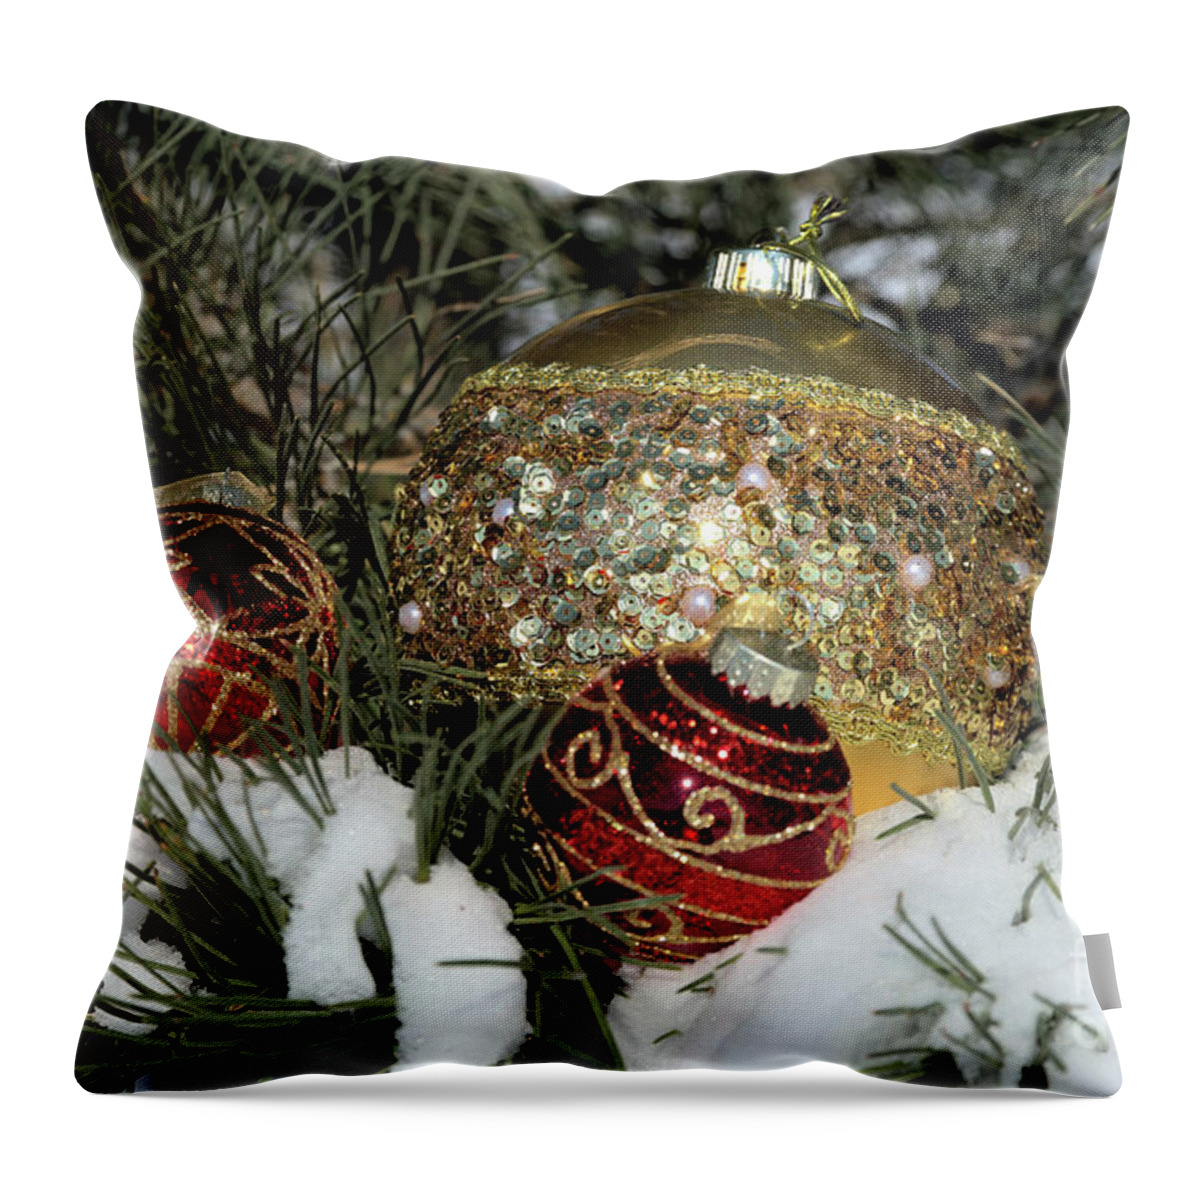 Fextive Throw Pillow featuring the photograph Round Holiday Ornaments Outdoors by Kae Cheatham